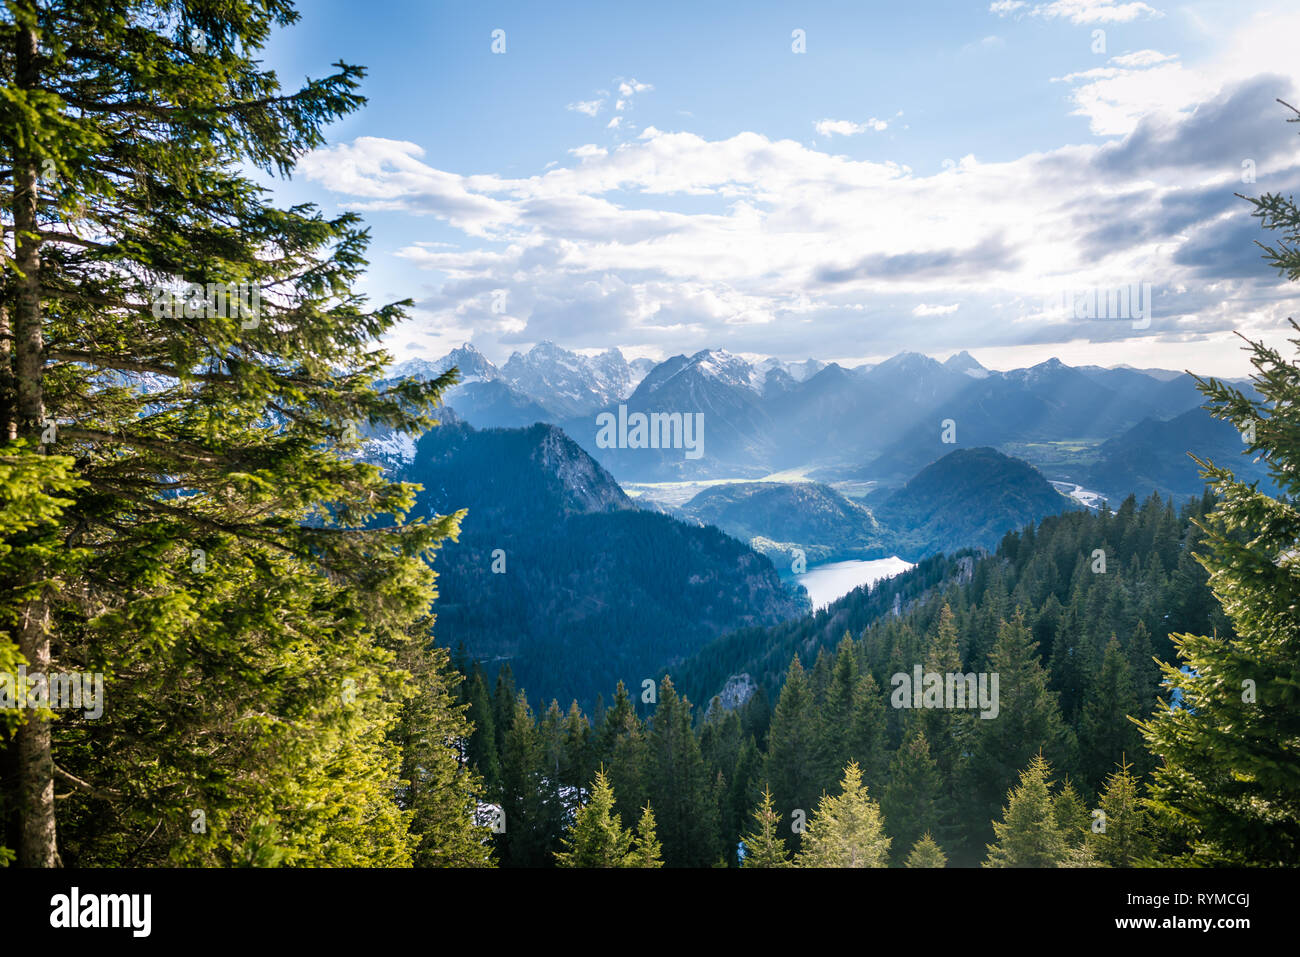 Scenic landscape overlooking the mountains with snowy tops. Sunlight rays falling through the clouds on beautiful valley with lakes and forest. Stock Photo